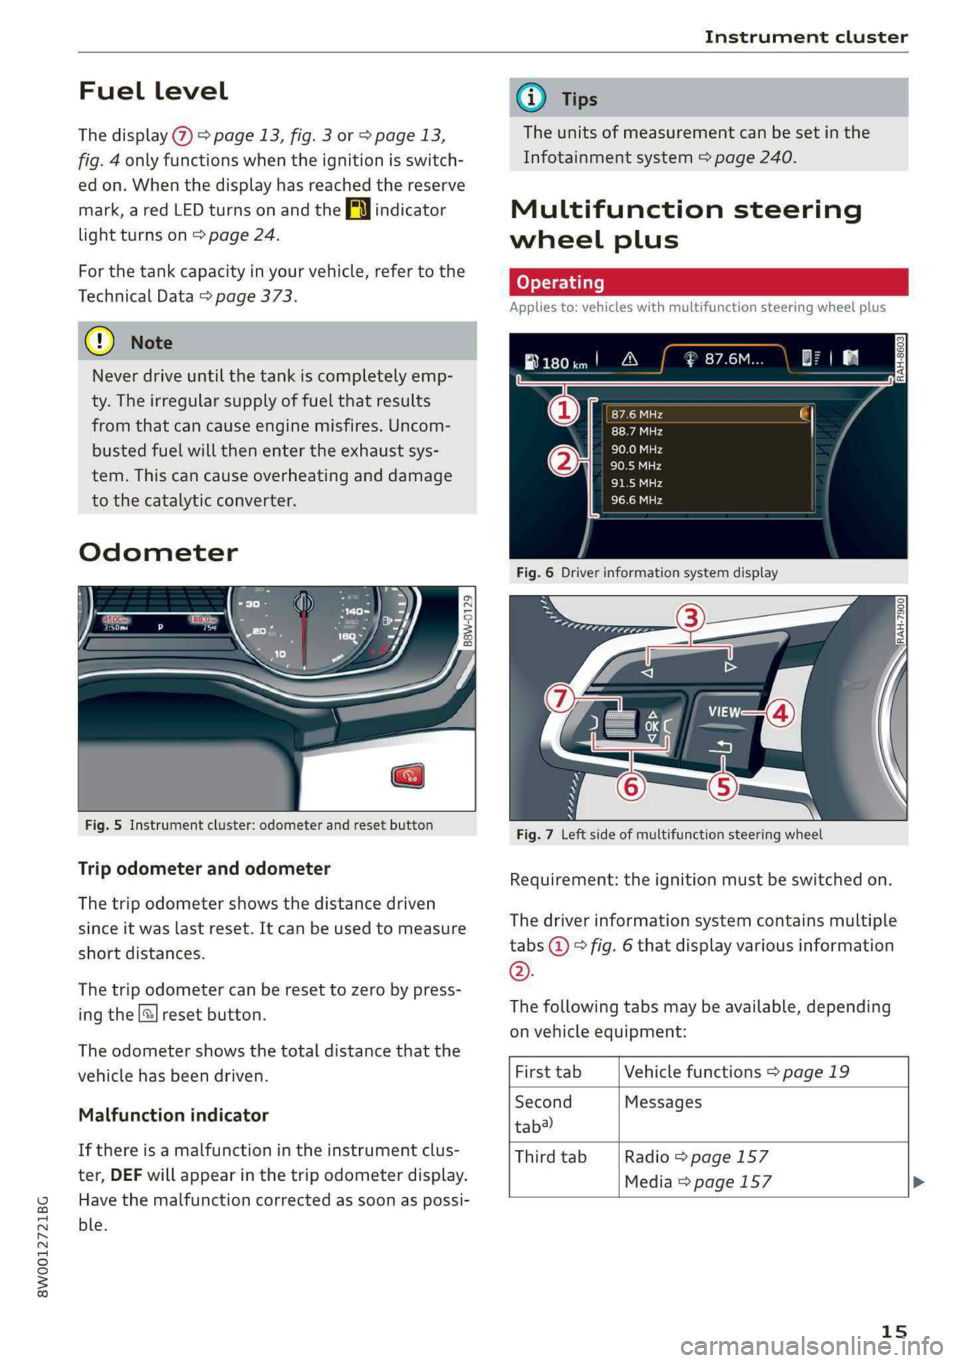 AUDI S4 2019 User Guide 8W0012721BG
Instrumentcluster
 
Fuellevel
Thedisplay>page13,fig.3orpage13,
fig.4onlyfunctionswhentheignitionisswitch-
edon.Whenthedisplayhasreached thereserve
mark,aredLEDturnsonandtheAlindicator
ligh